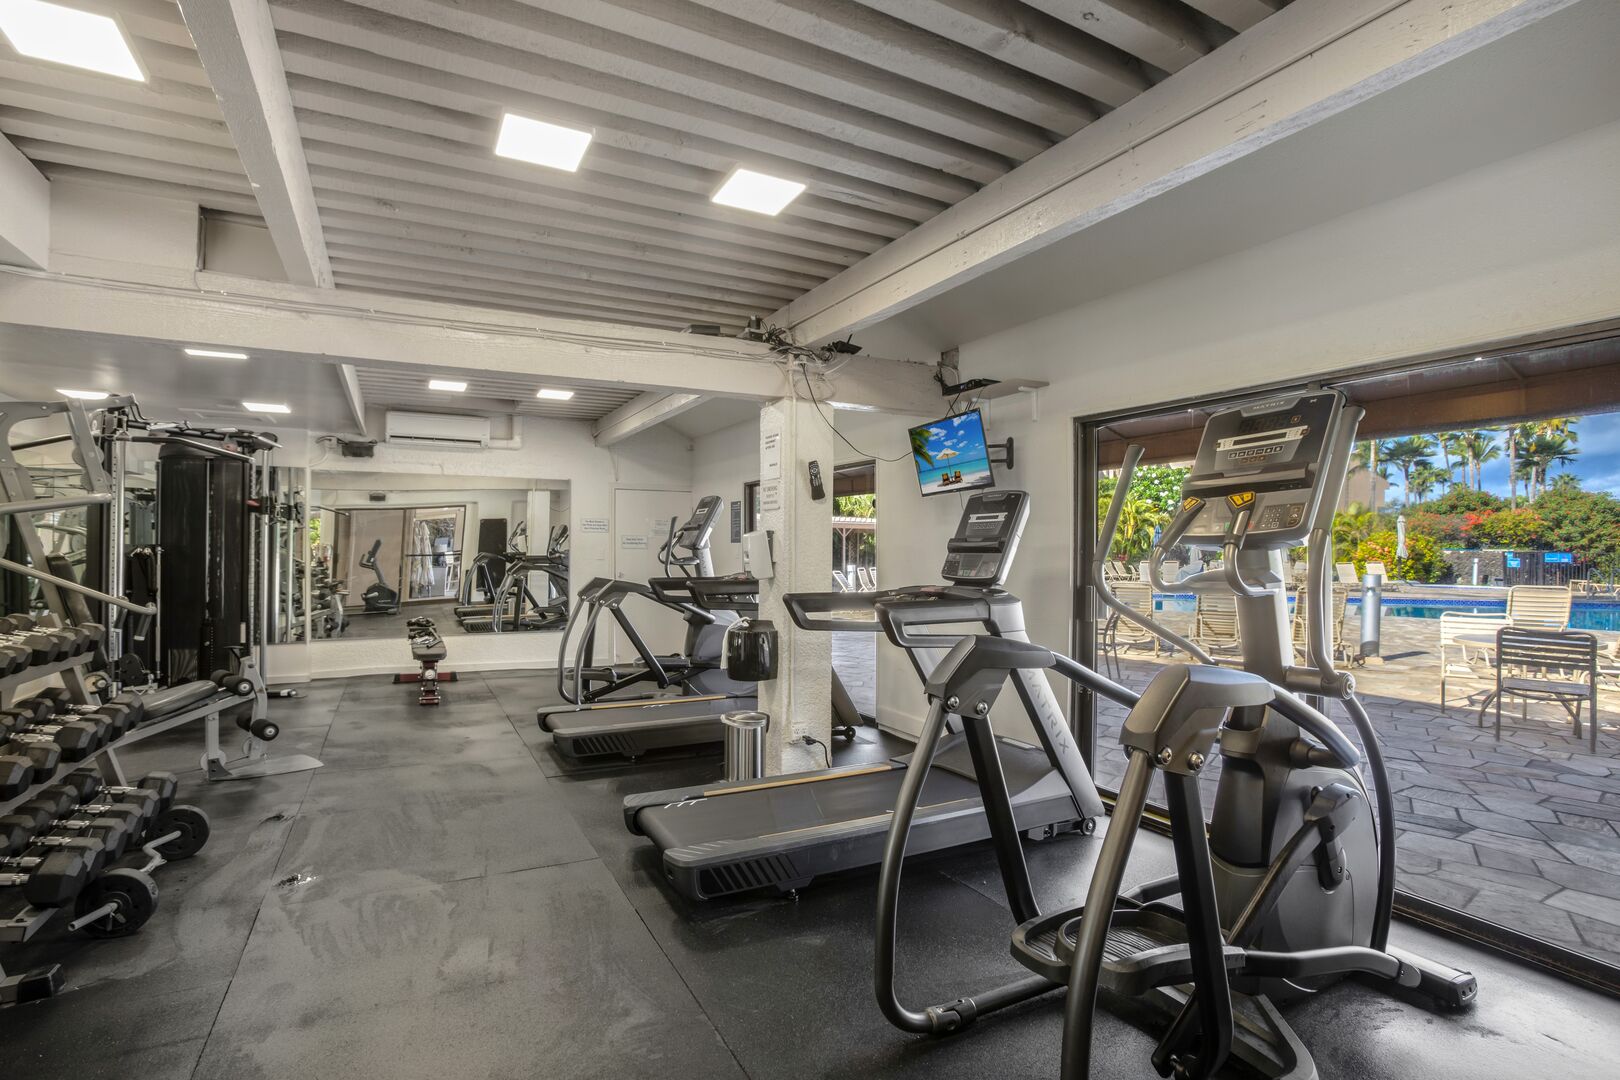 Fully equipped gym/workout facility